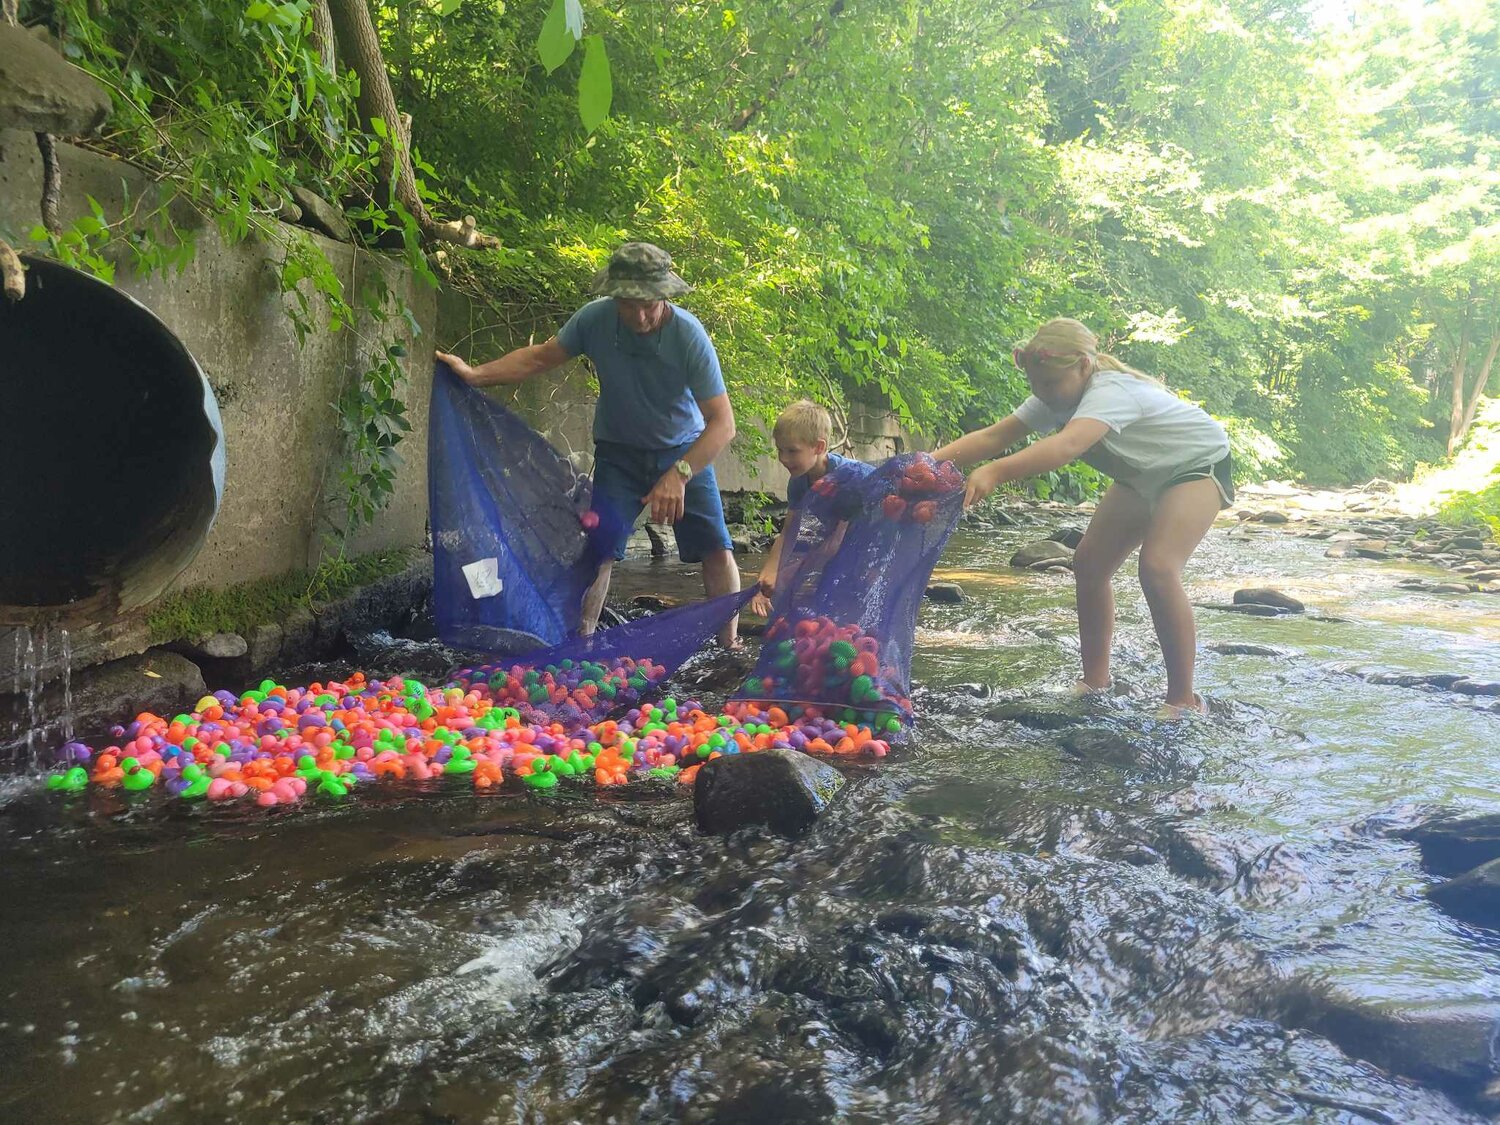 4-Hers release ducks to race down Walton’s Third Brook, Saturday, July 22.